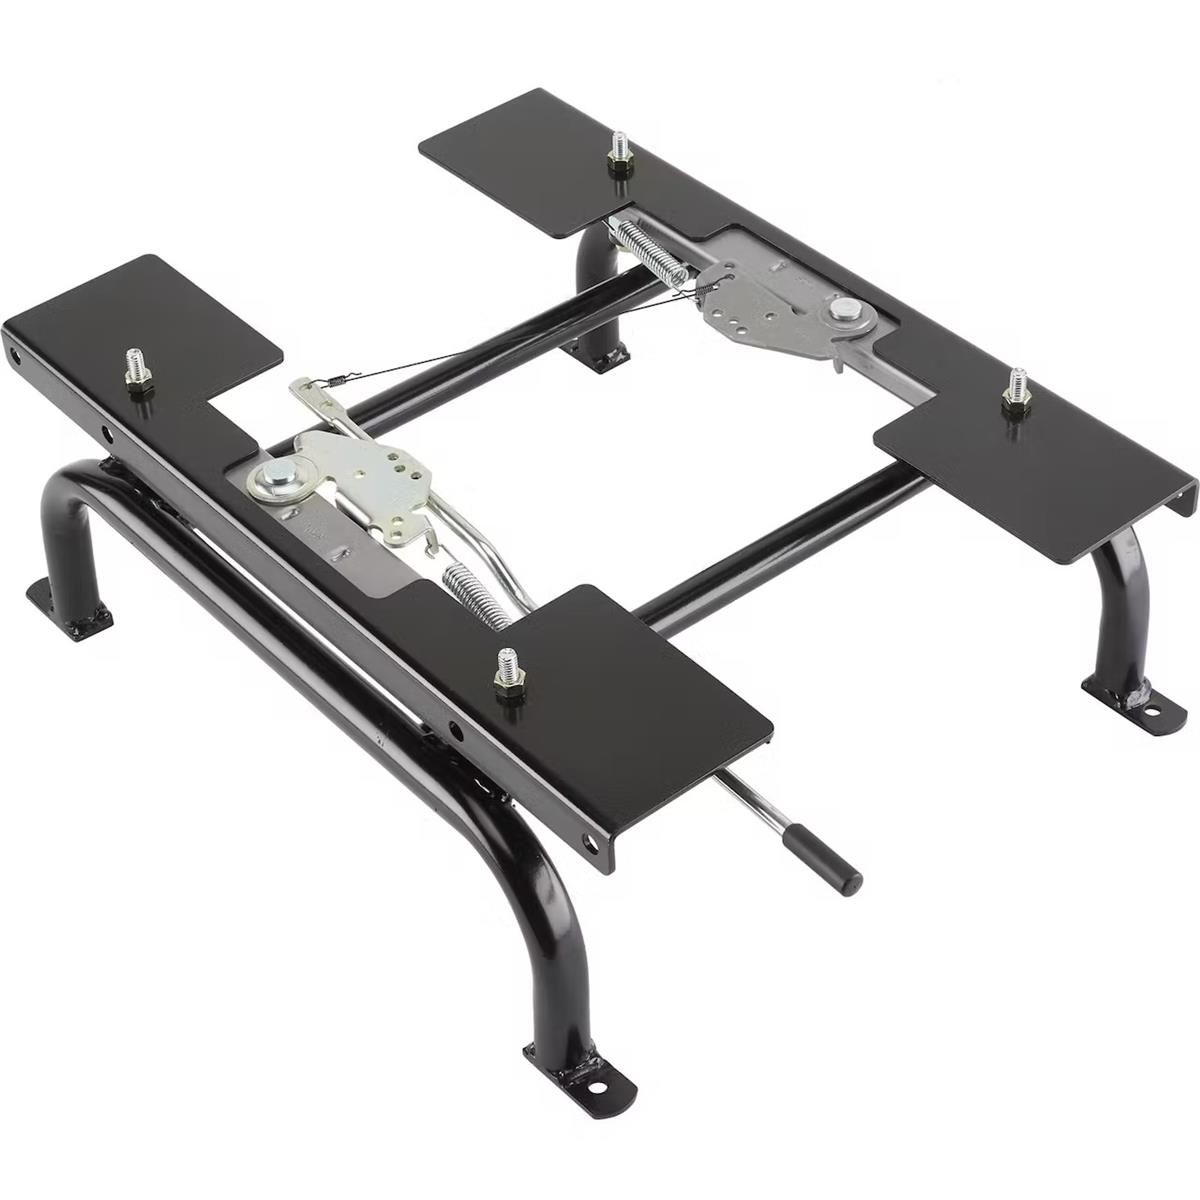 COM-5753 | COM-5753 Universal Seat Mounting Frame with Slider and Mounts Common Application2.jpg